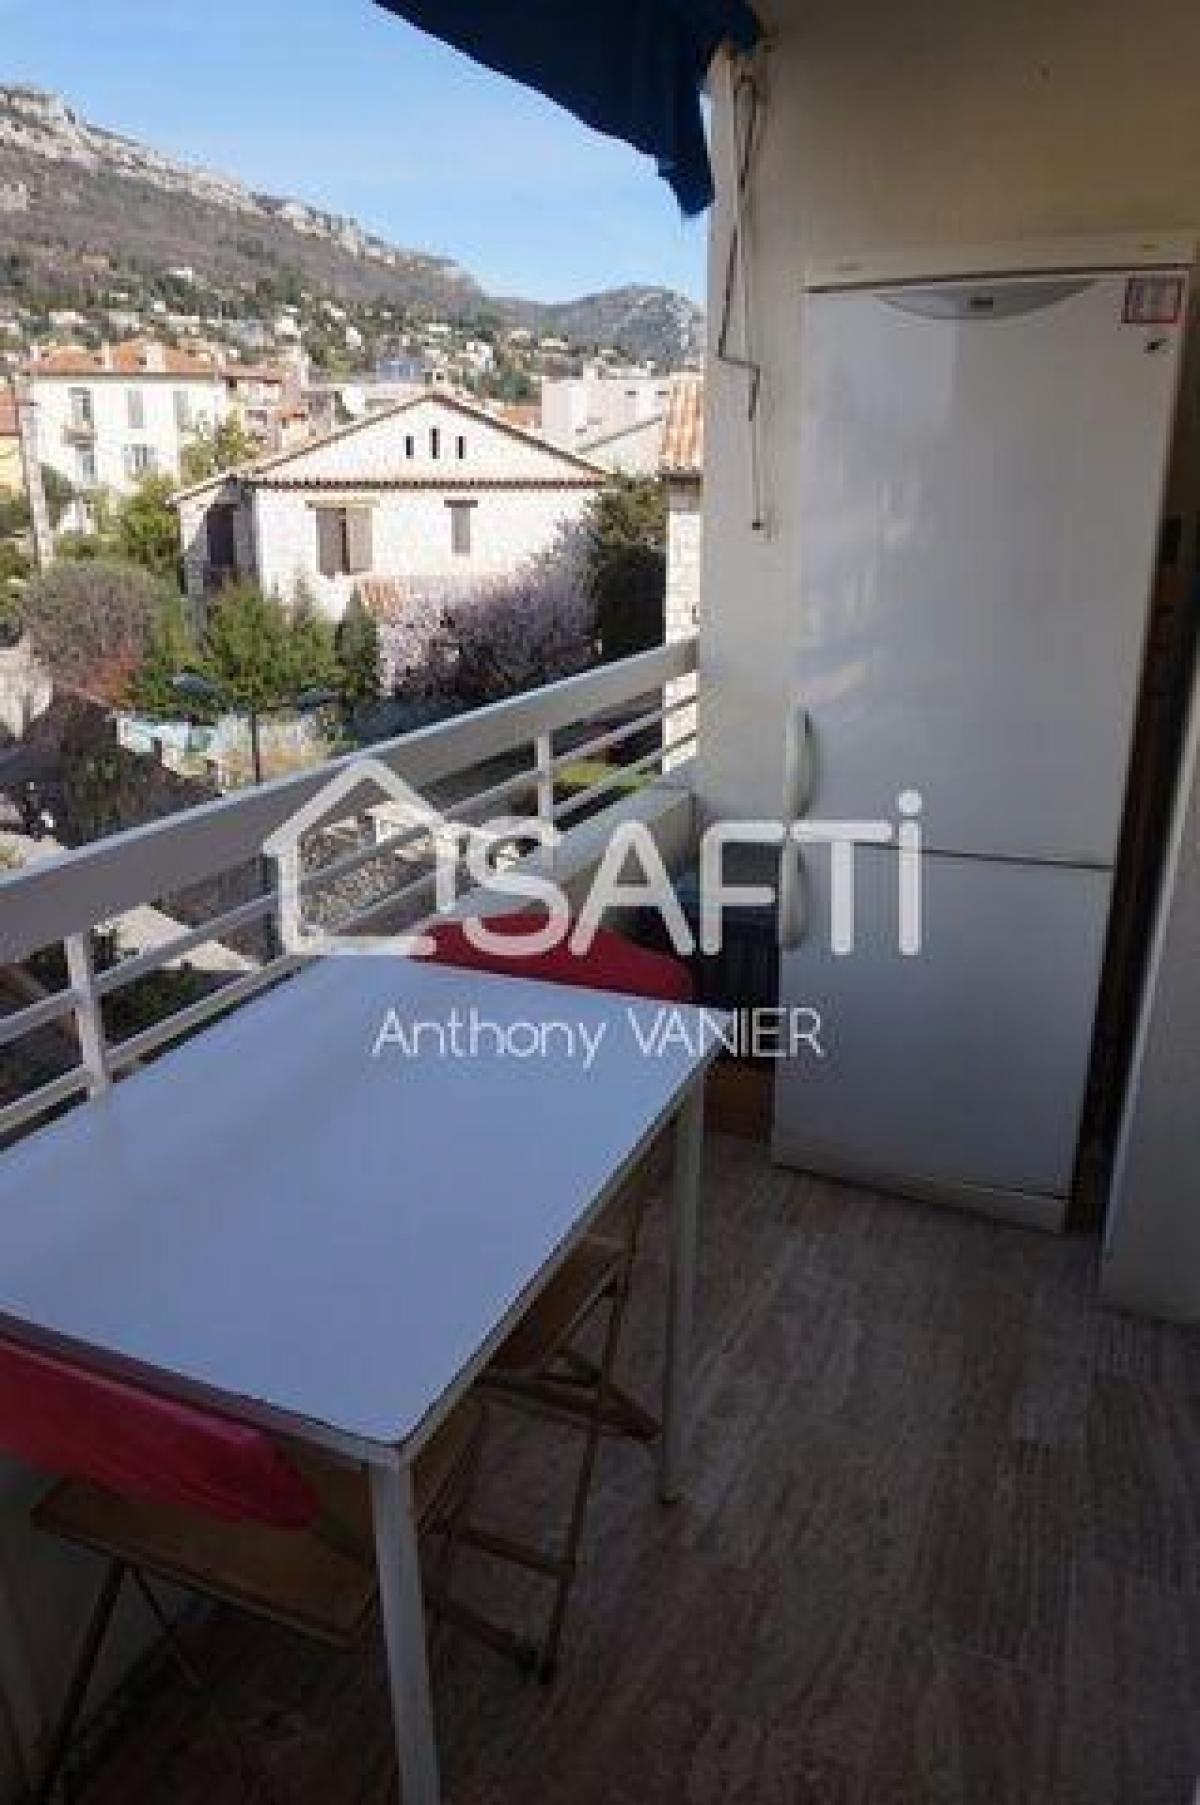 Picture of Apartment For Sale in Vence, Cote d'Azur, France